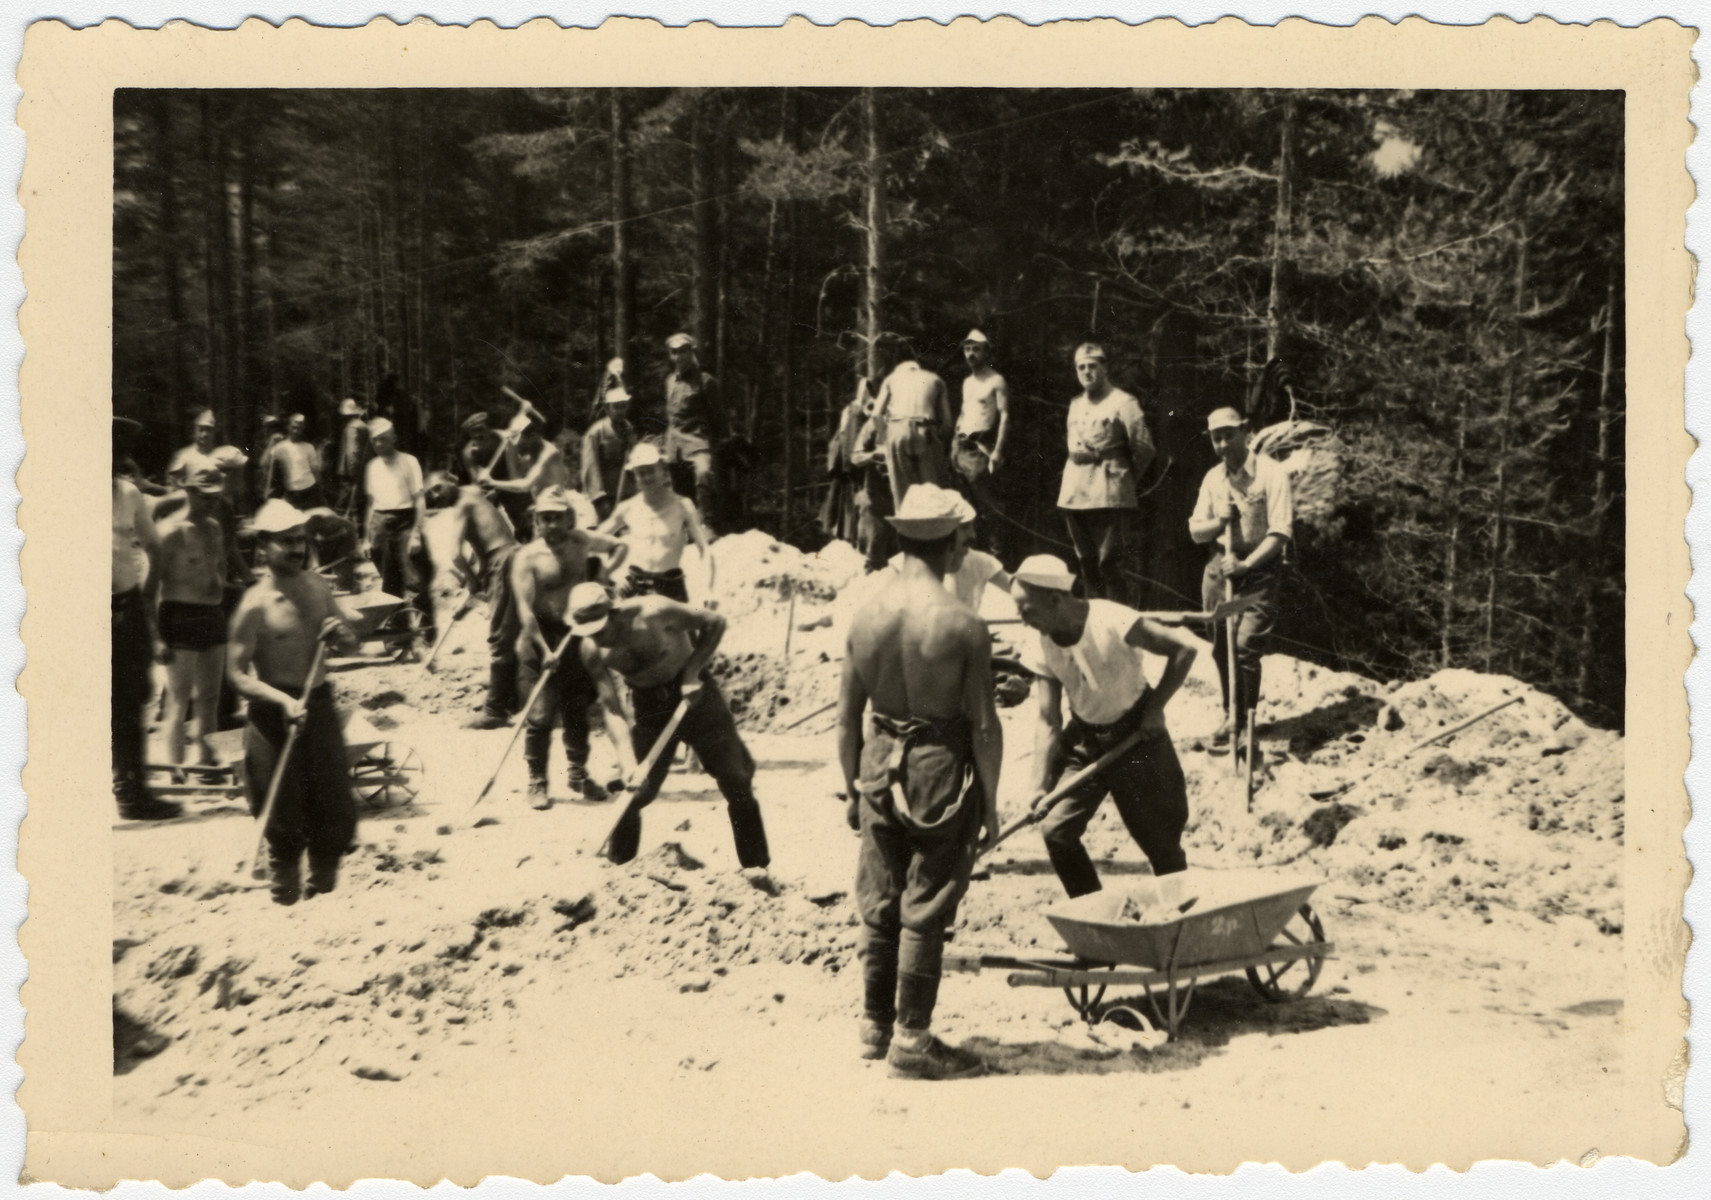 Bulgarian Jews dig a road in a forced labor brigade.

Standing in the back in his army uniform is Nissim Farhi.  In Bulgaria, Jewish officers were allowed to serve as officers in labor brigades and wear their uniforms.